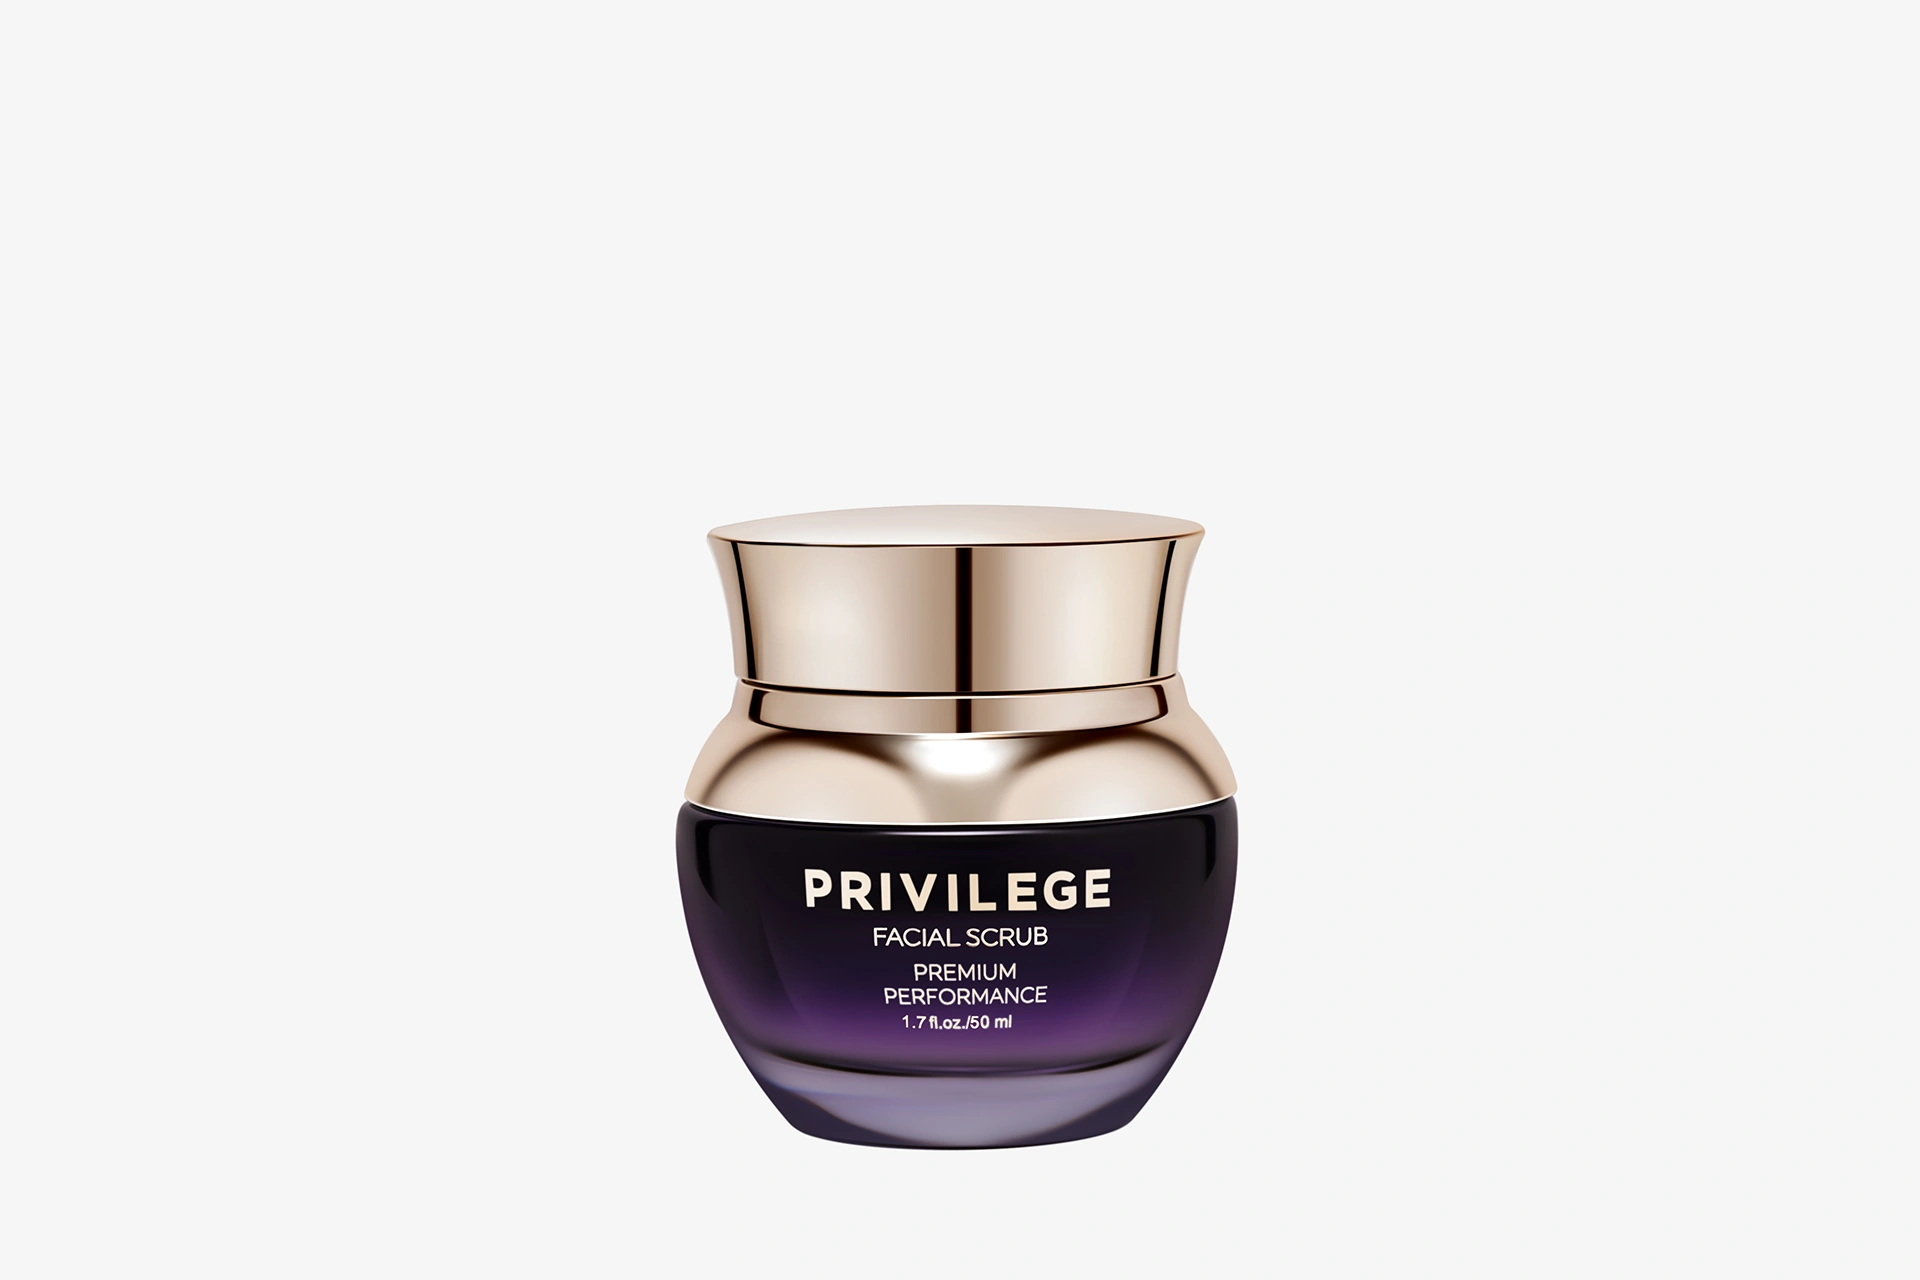 Privilege Facial Scrub with coffee oil and extract